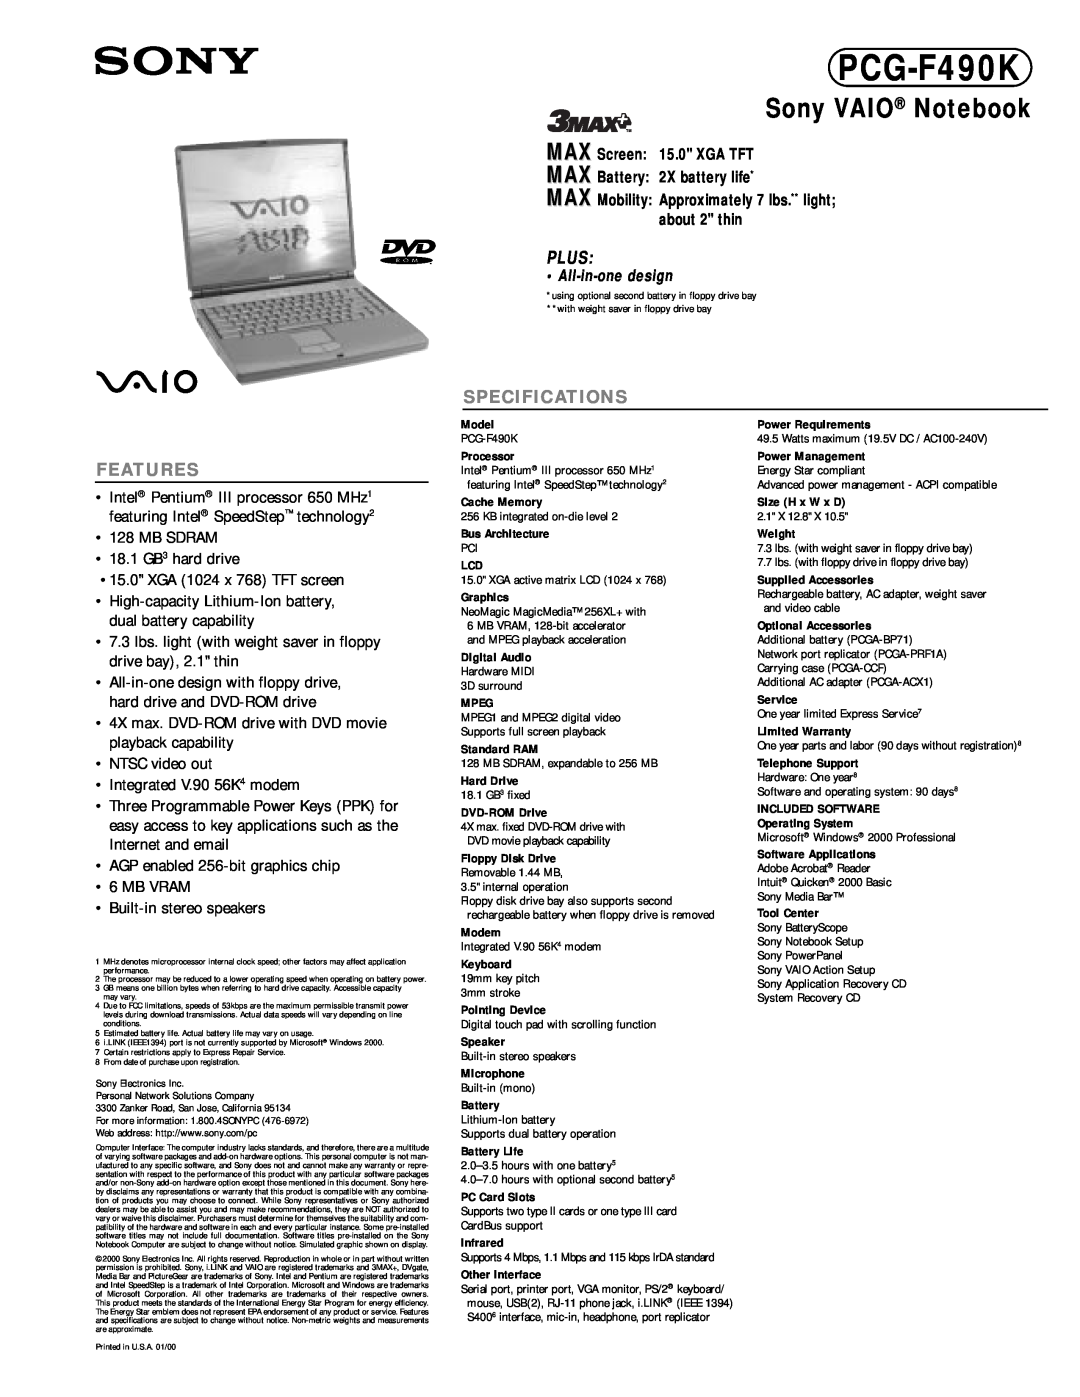 Sony PCG-F490K specifications Sony VAIO Notebook, Plus, Specifications, Features, All-in-one design 